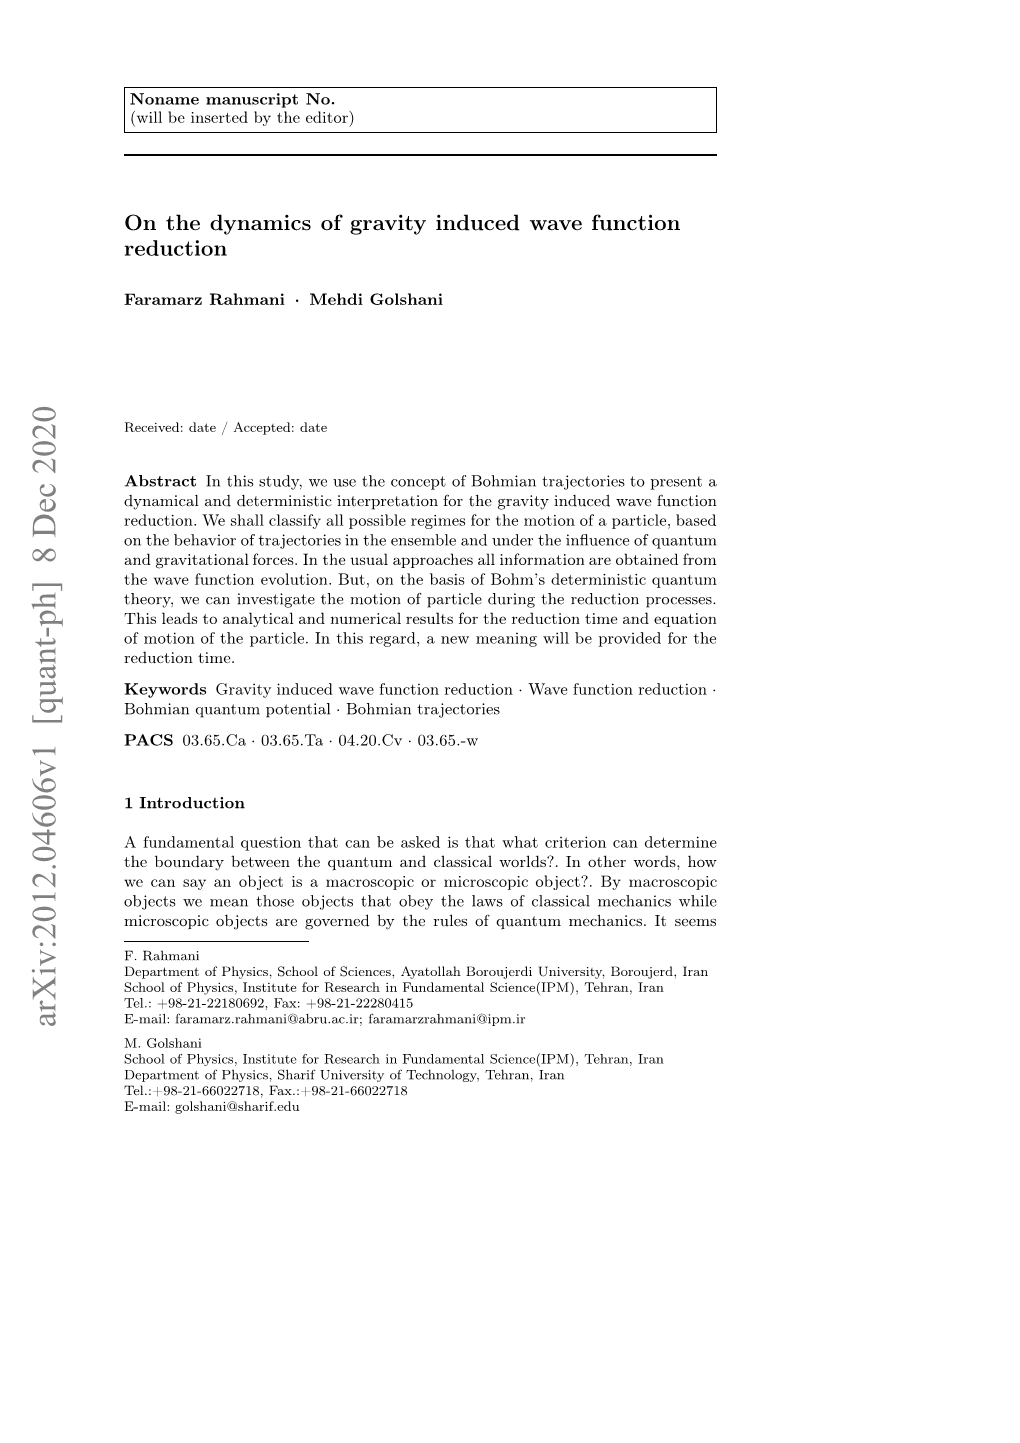 On the Dynamics of Gravity Induced Wave Function Reduction 3